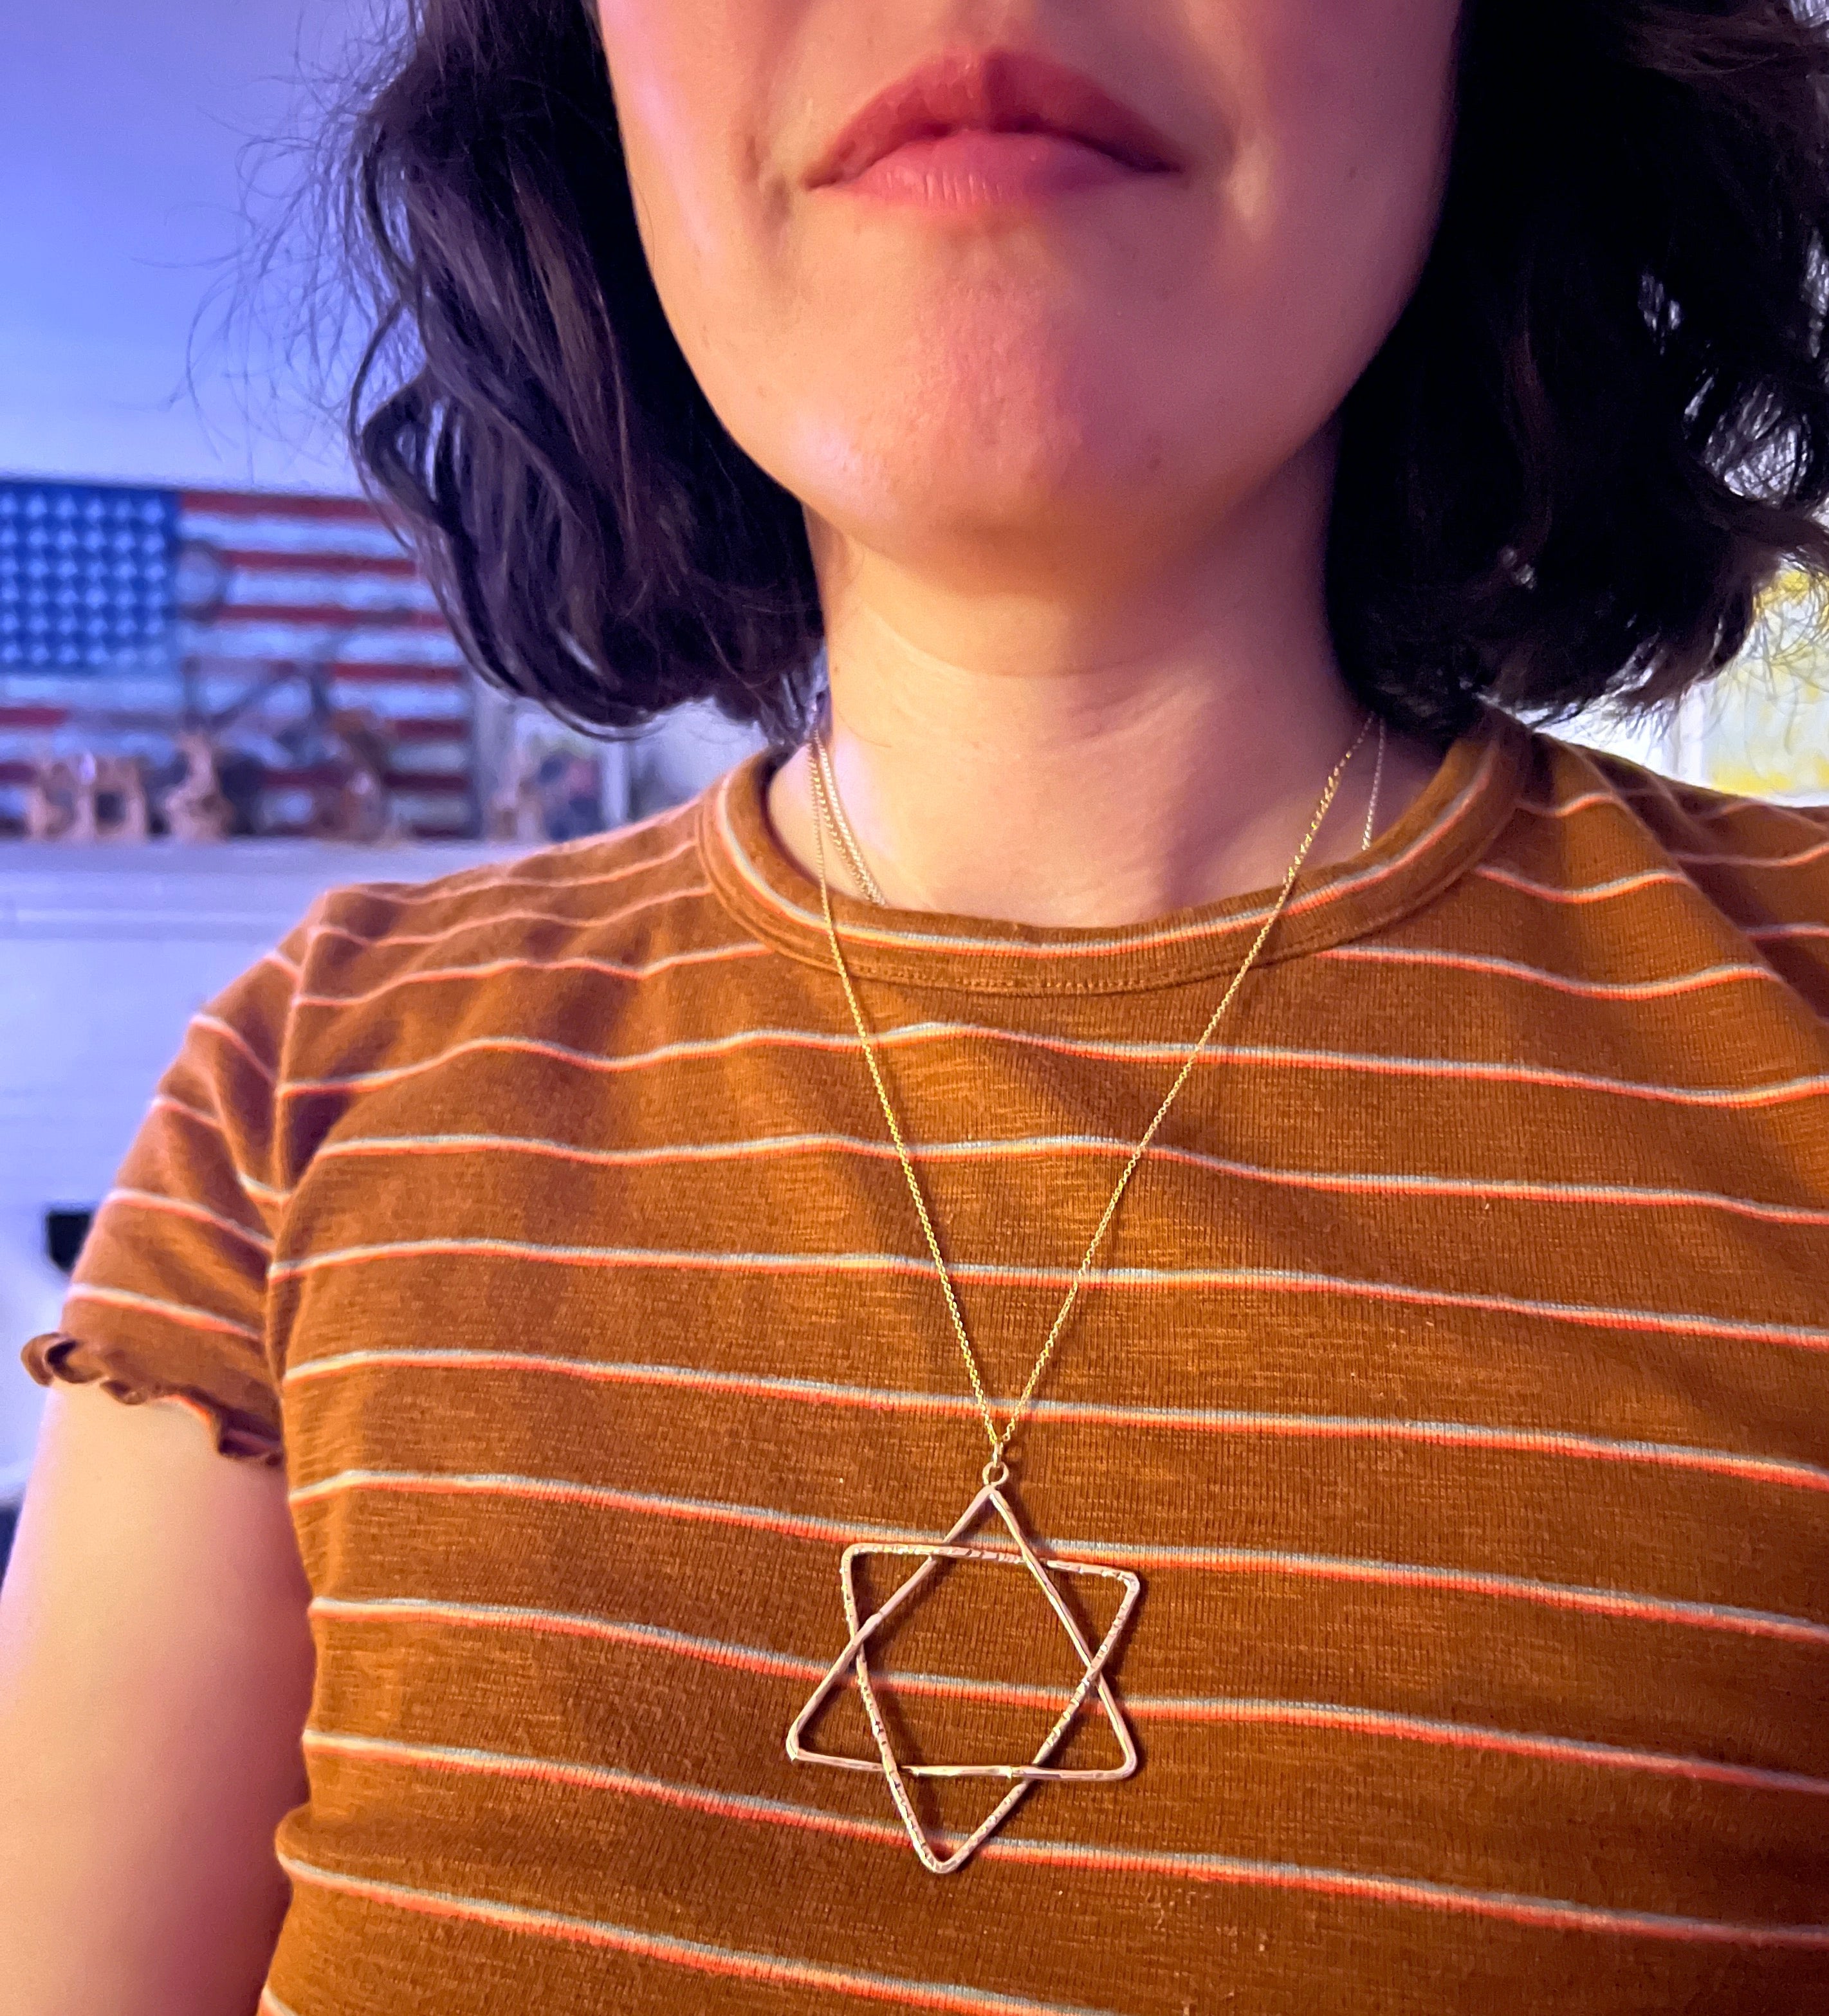 Jewish Star Necklace Women Men Jewelry 2016 New Trendy Gold Plated  Stainless Steel Vintage Star of David Pendant & Necklace P116 | Wish | Star  of david pendant, Jewish star necklace, Mens jewelry